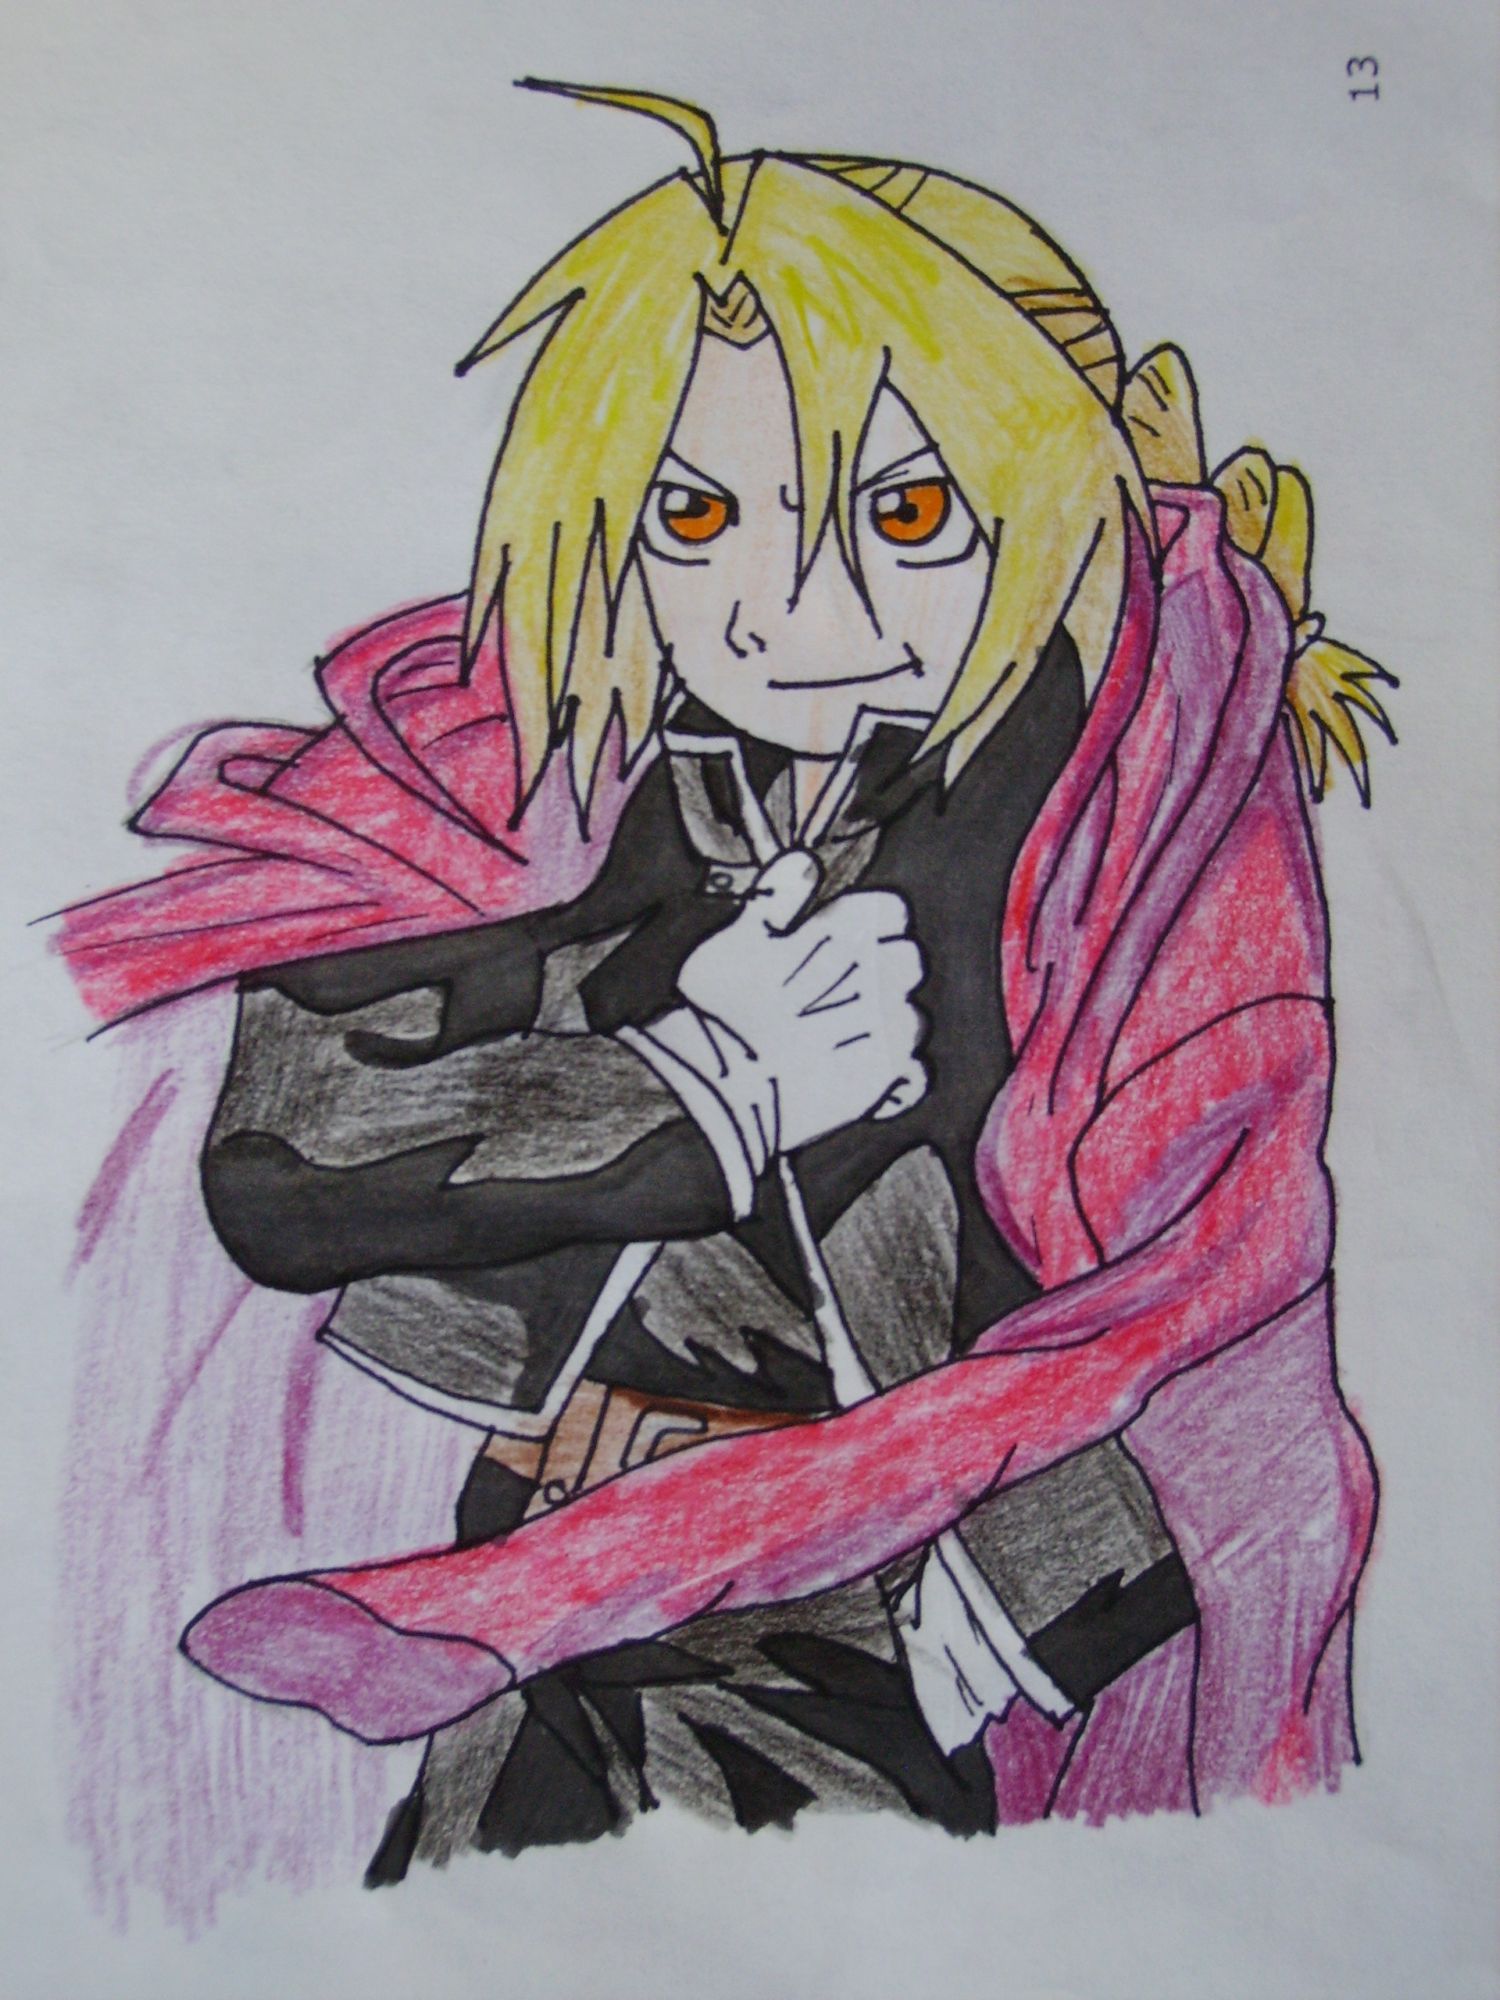 Edward Elric by Iskeanime16